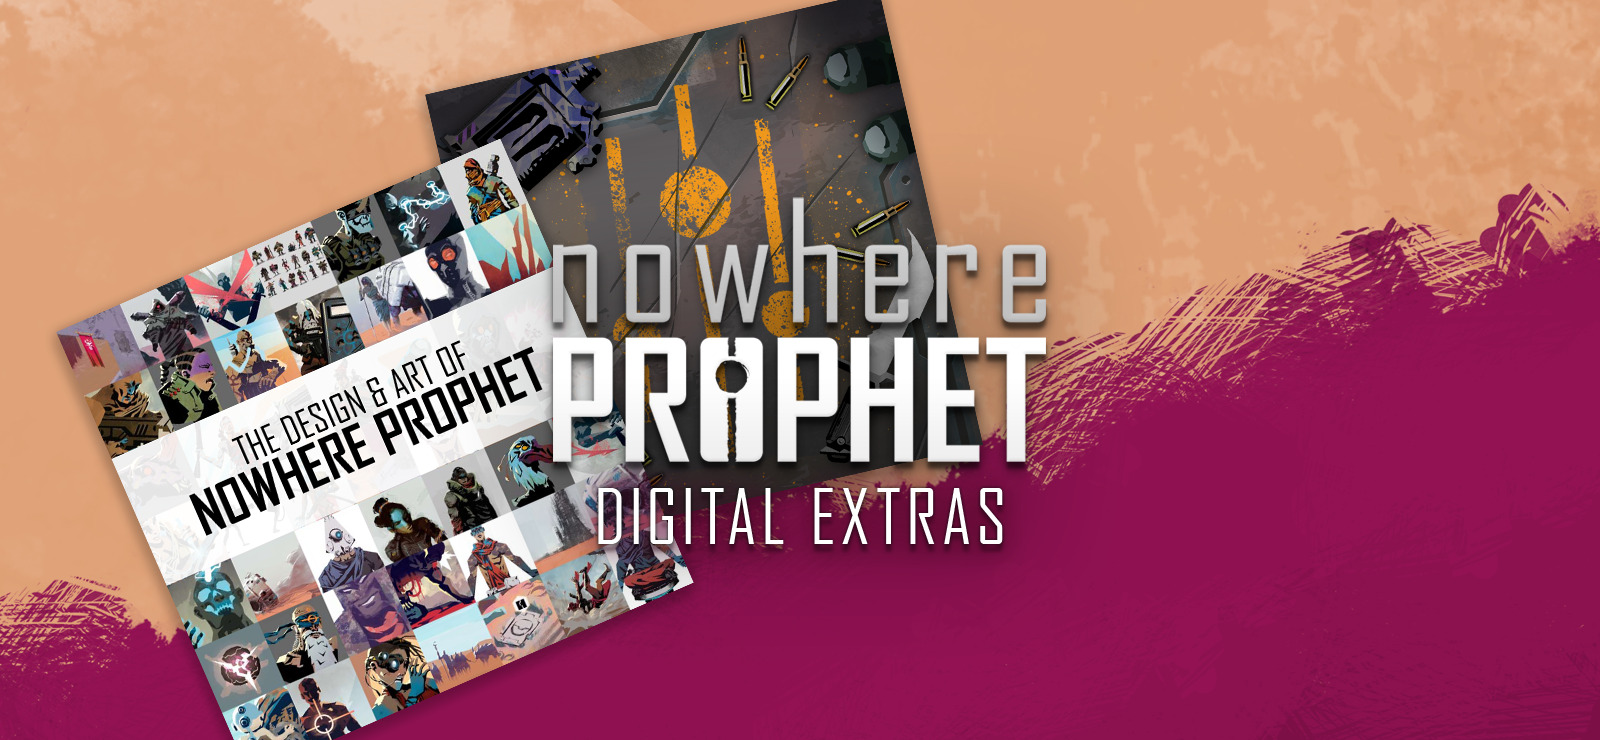 Nowhere Prophet Game Wallpapers